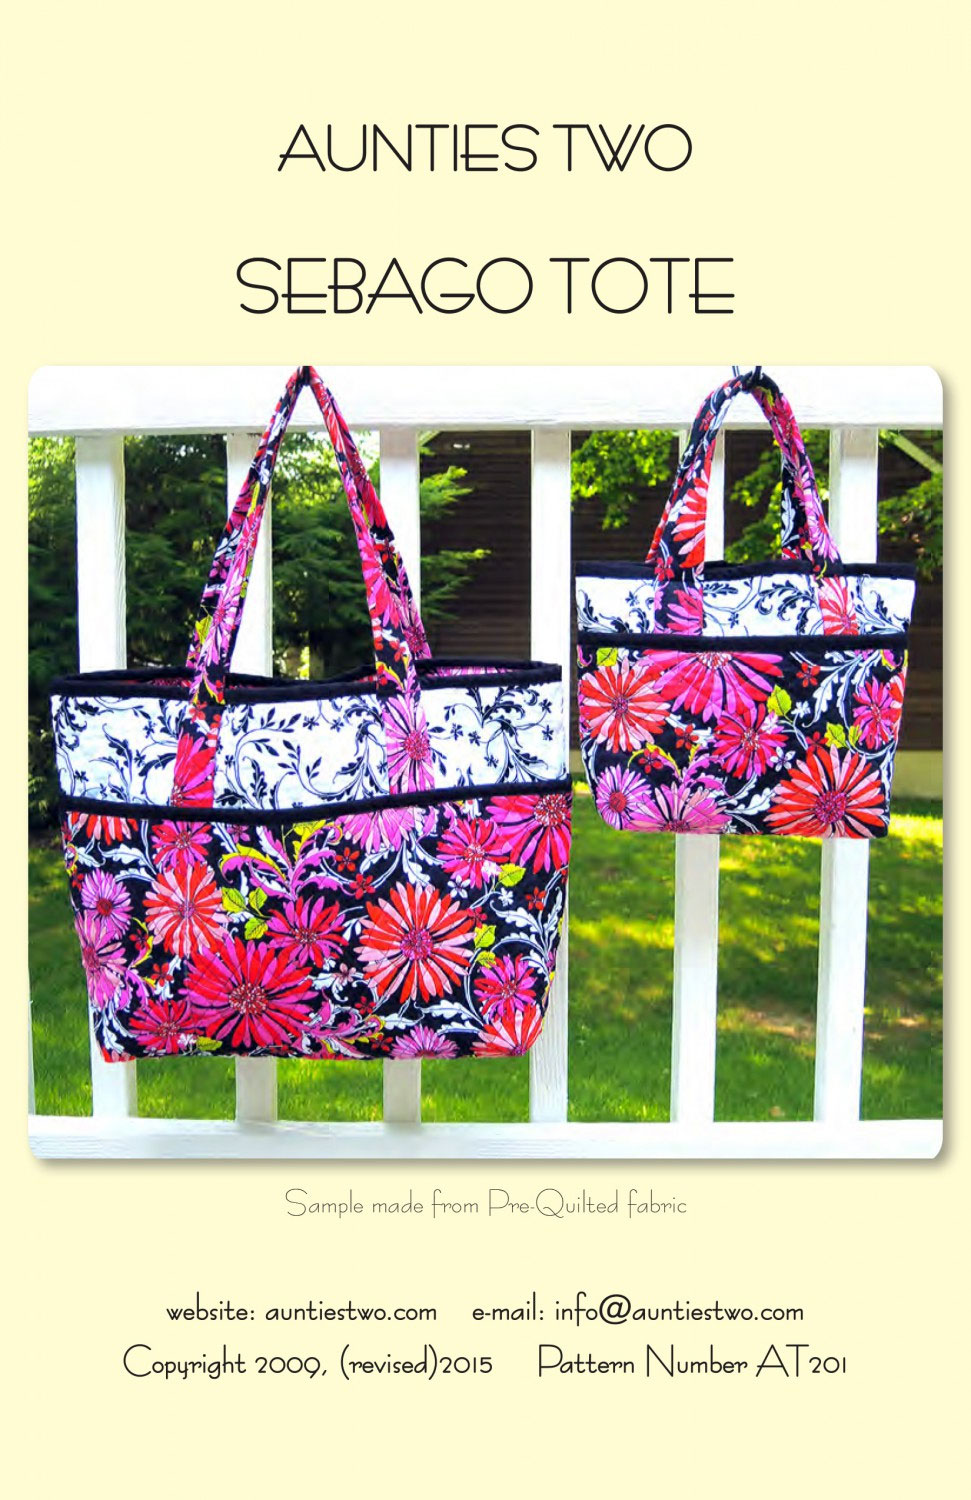 sebago-tote-sewing-pattern-Aunties-Two-front